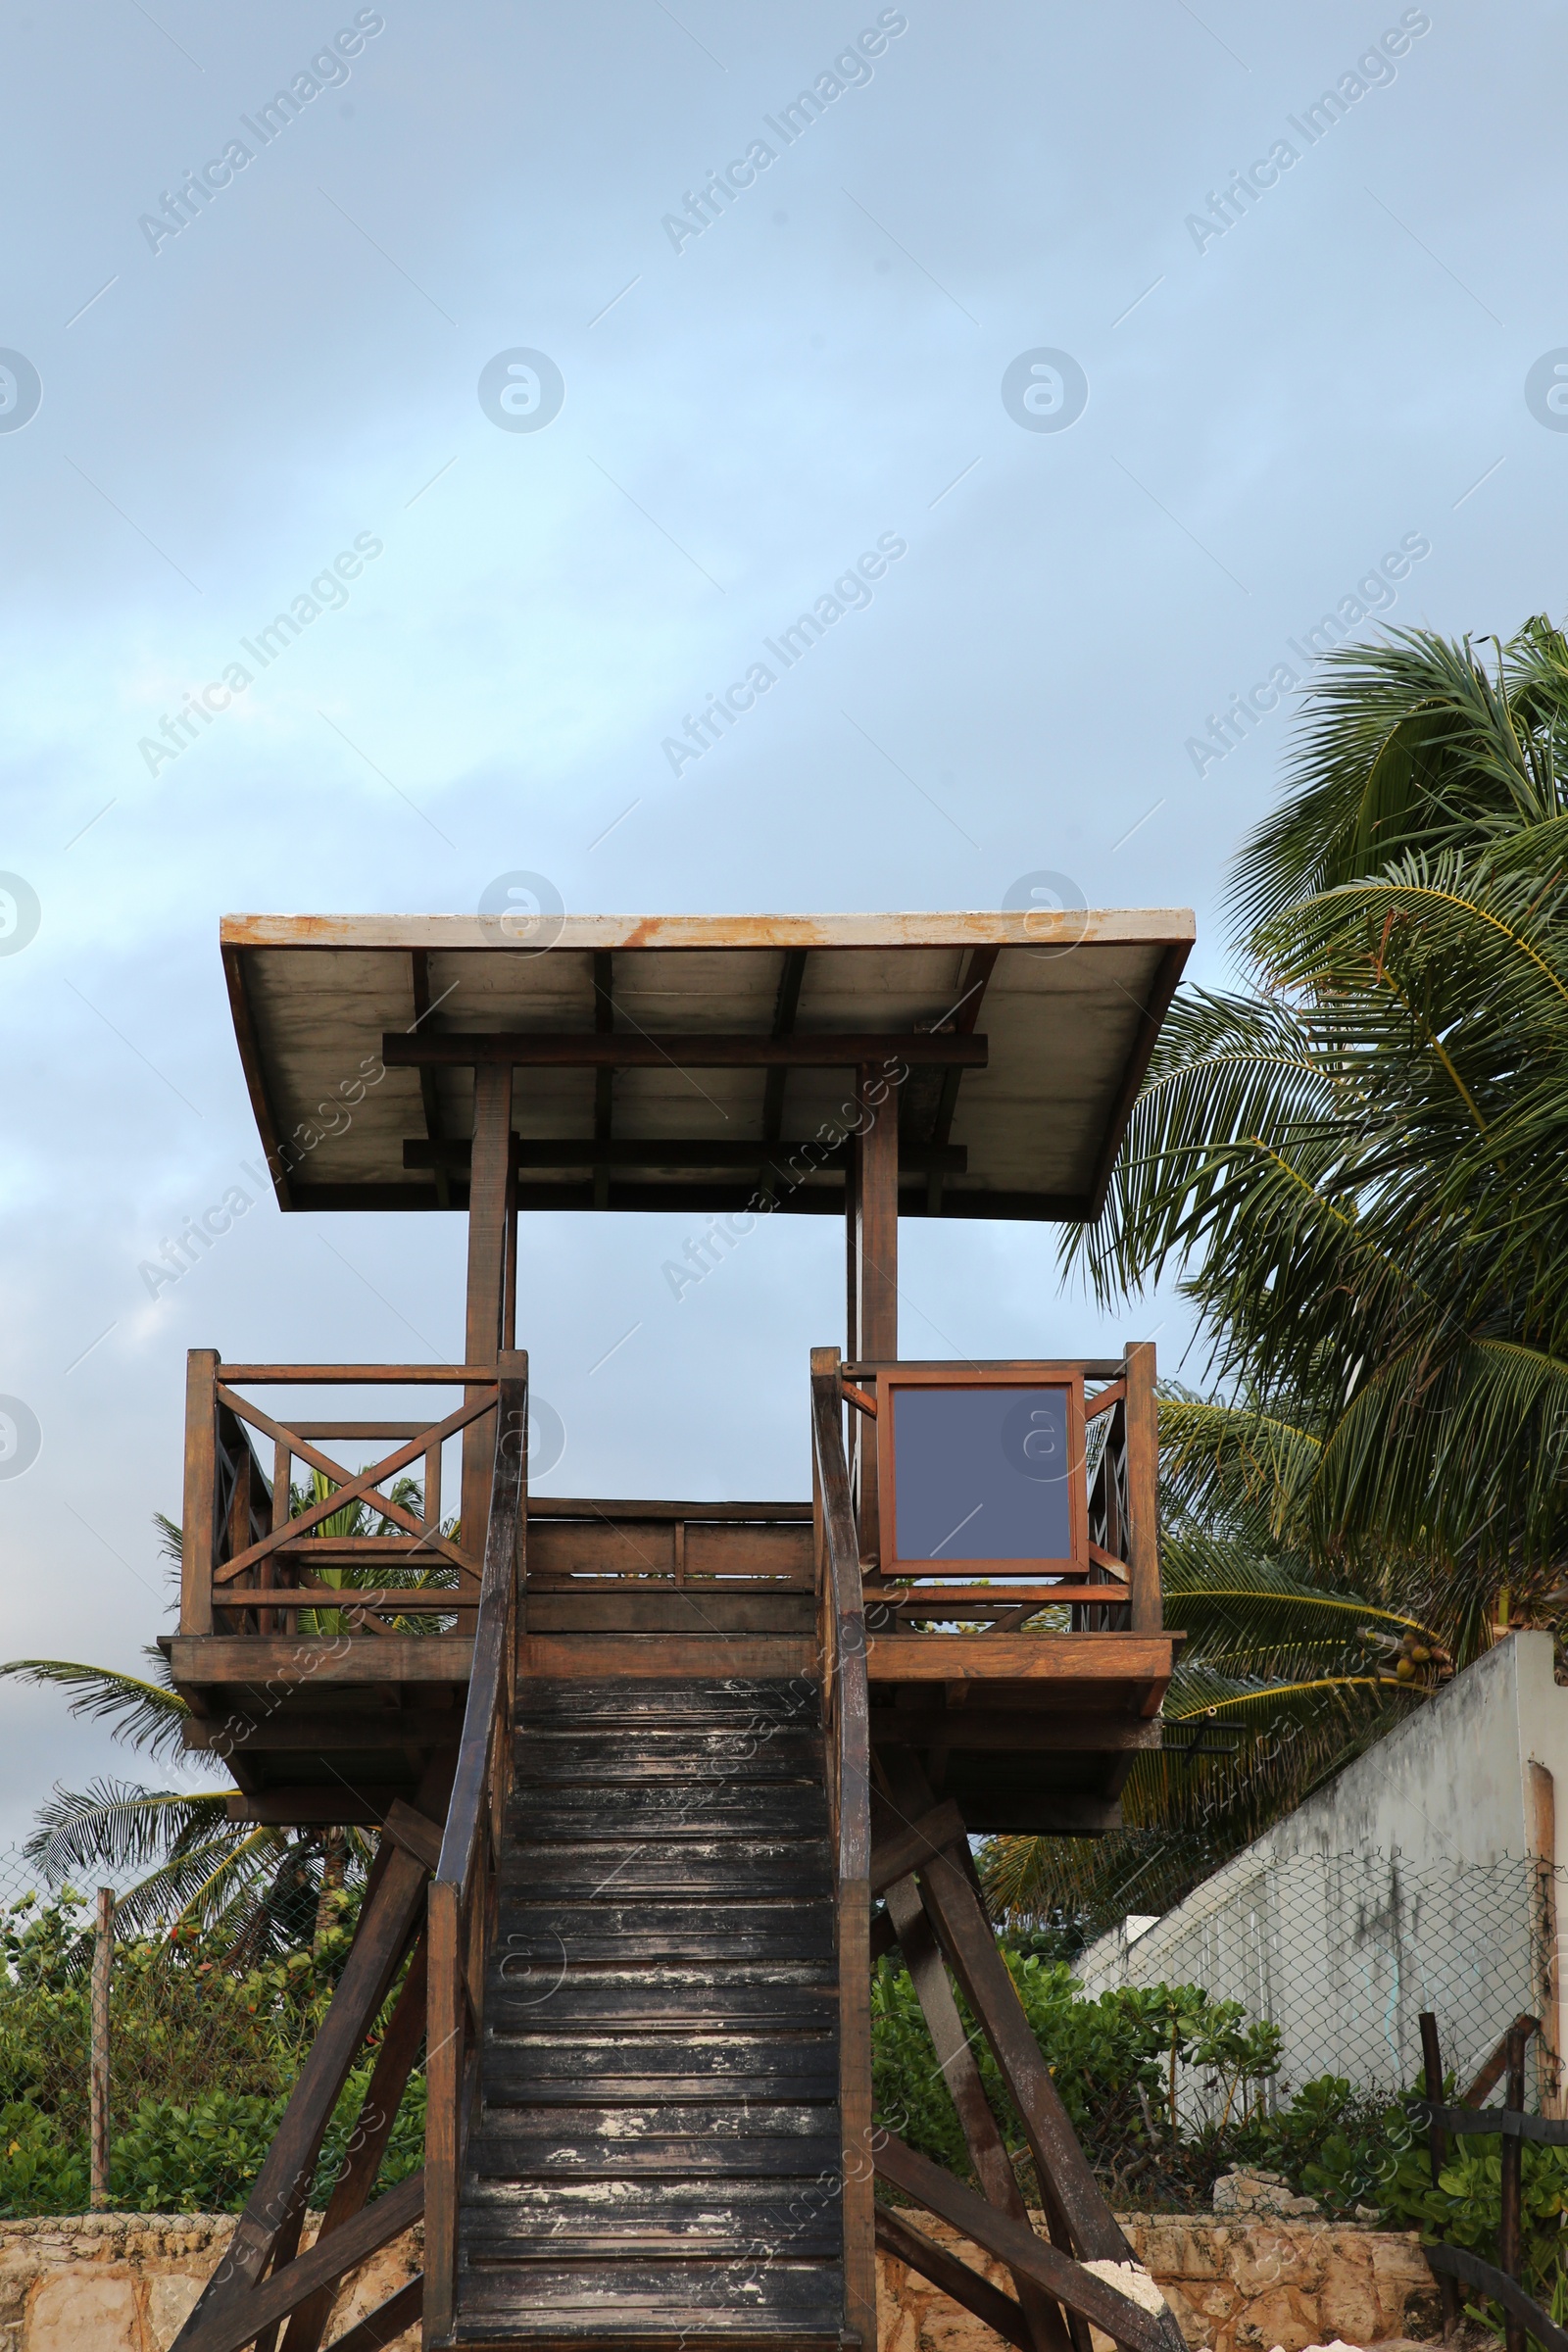 Photo of Wooden lifeguard tower near palm trees on sunny day